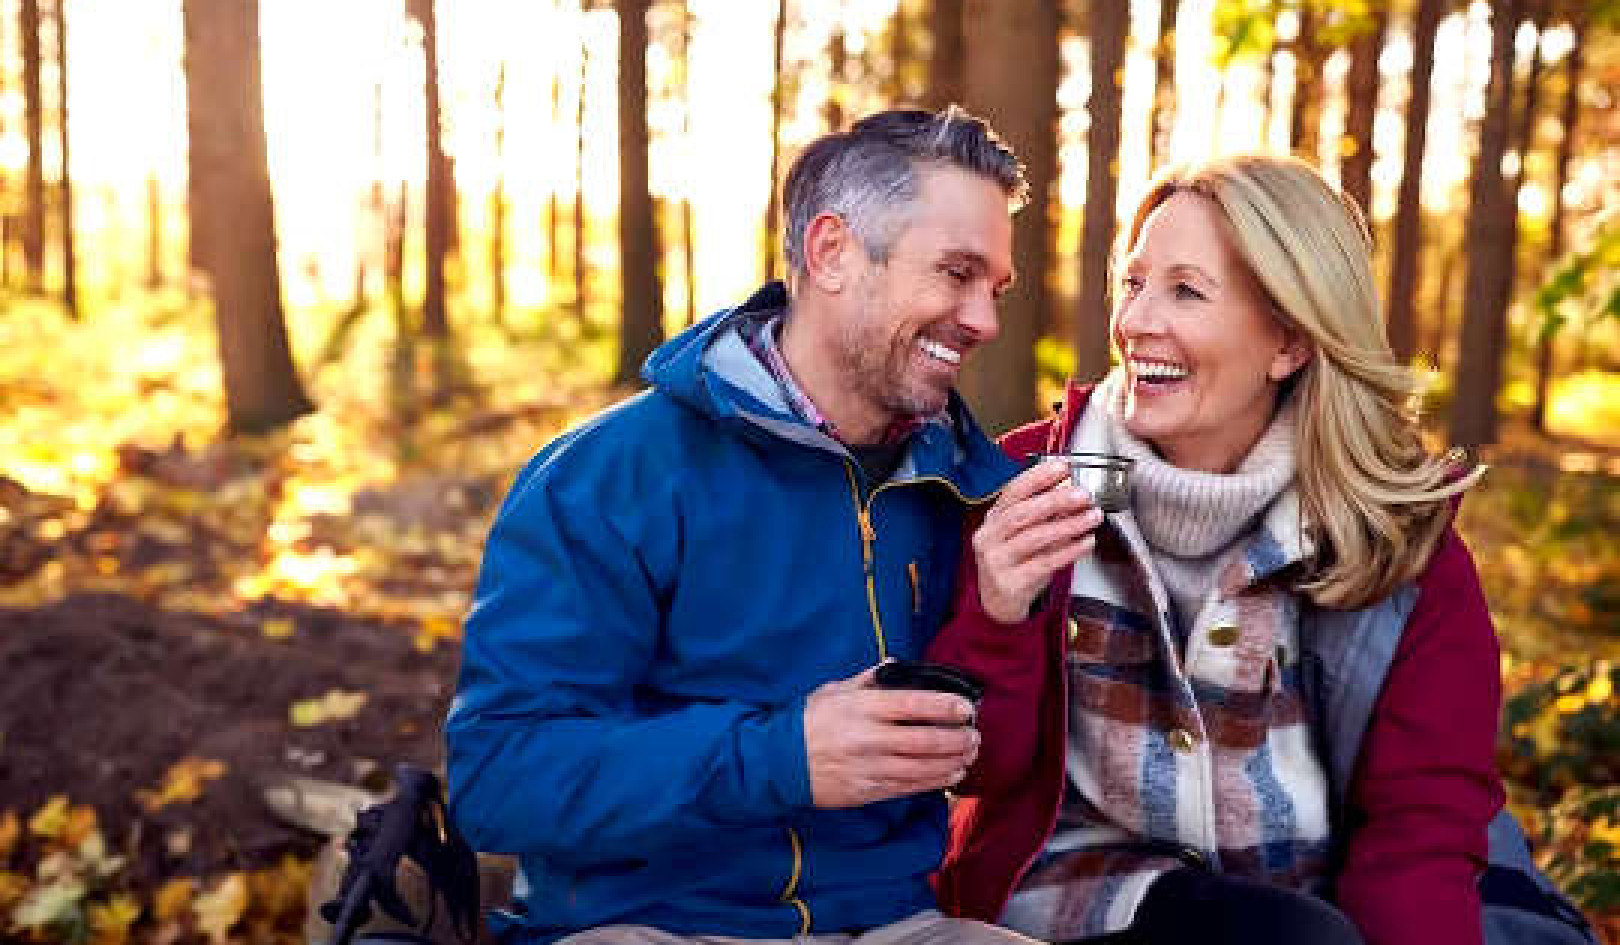 Turning 50? Four Things to Improve Your Health and Well-Being